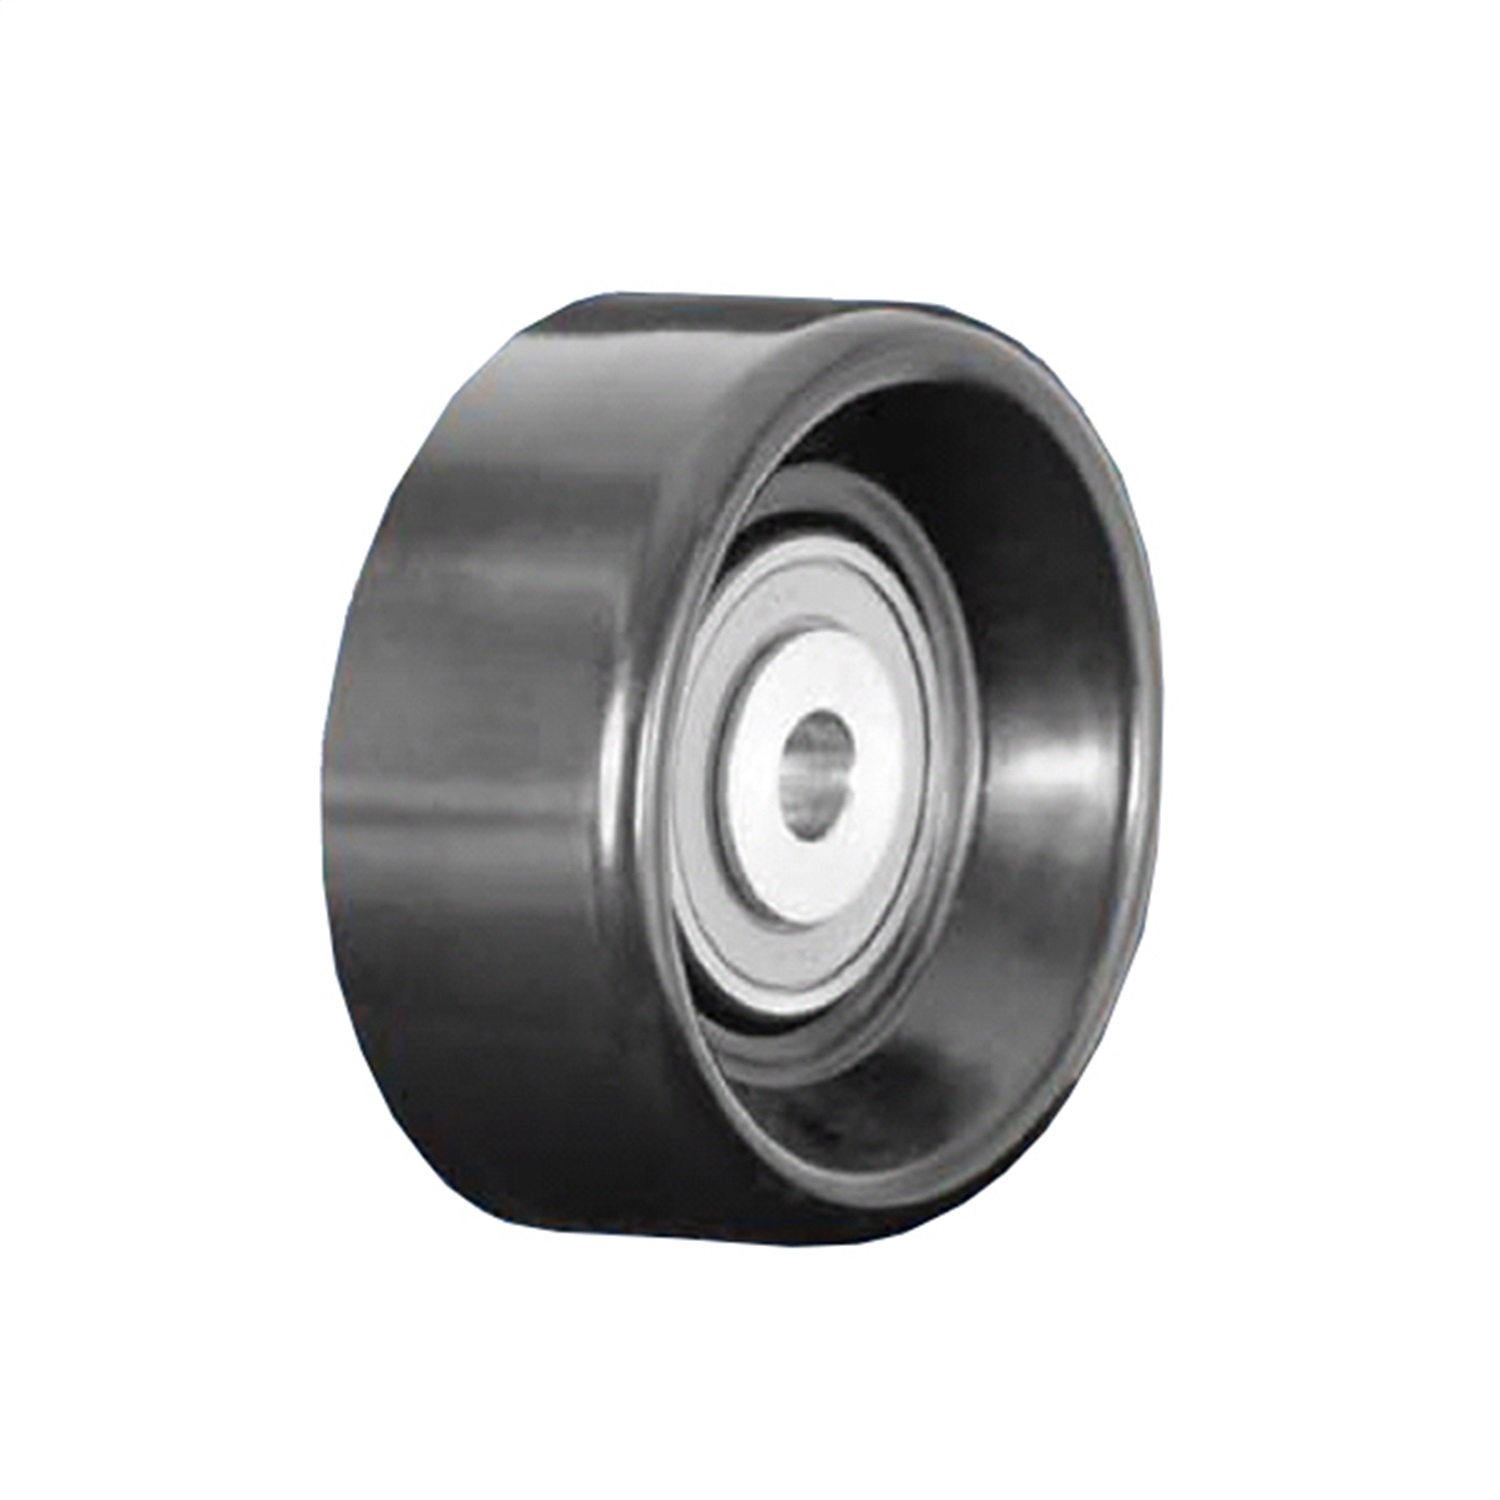 Jeep Omix Idler Pulley Chrysler Ls 98-99 2.7L Concorde, Intredpid,lhs; Rs/rg 01-04 3.3L And 3.8L